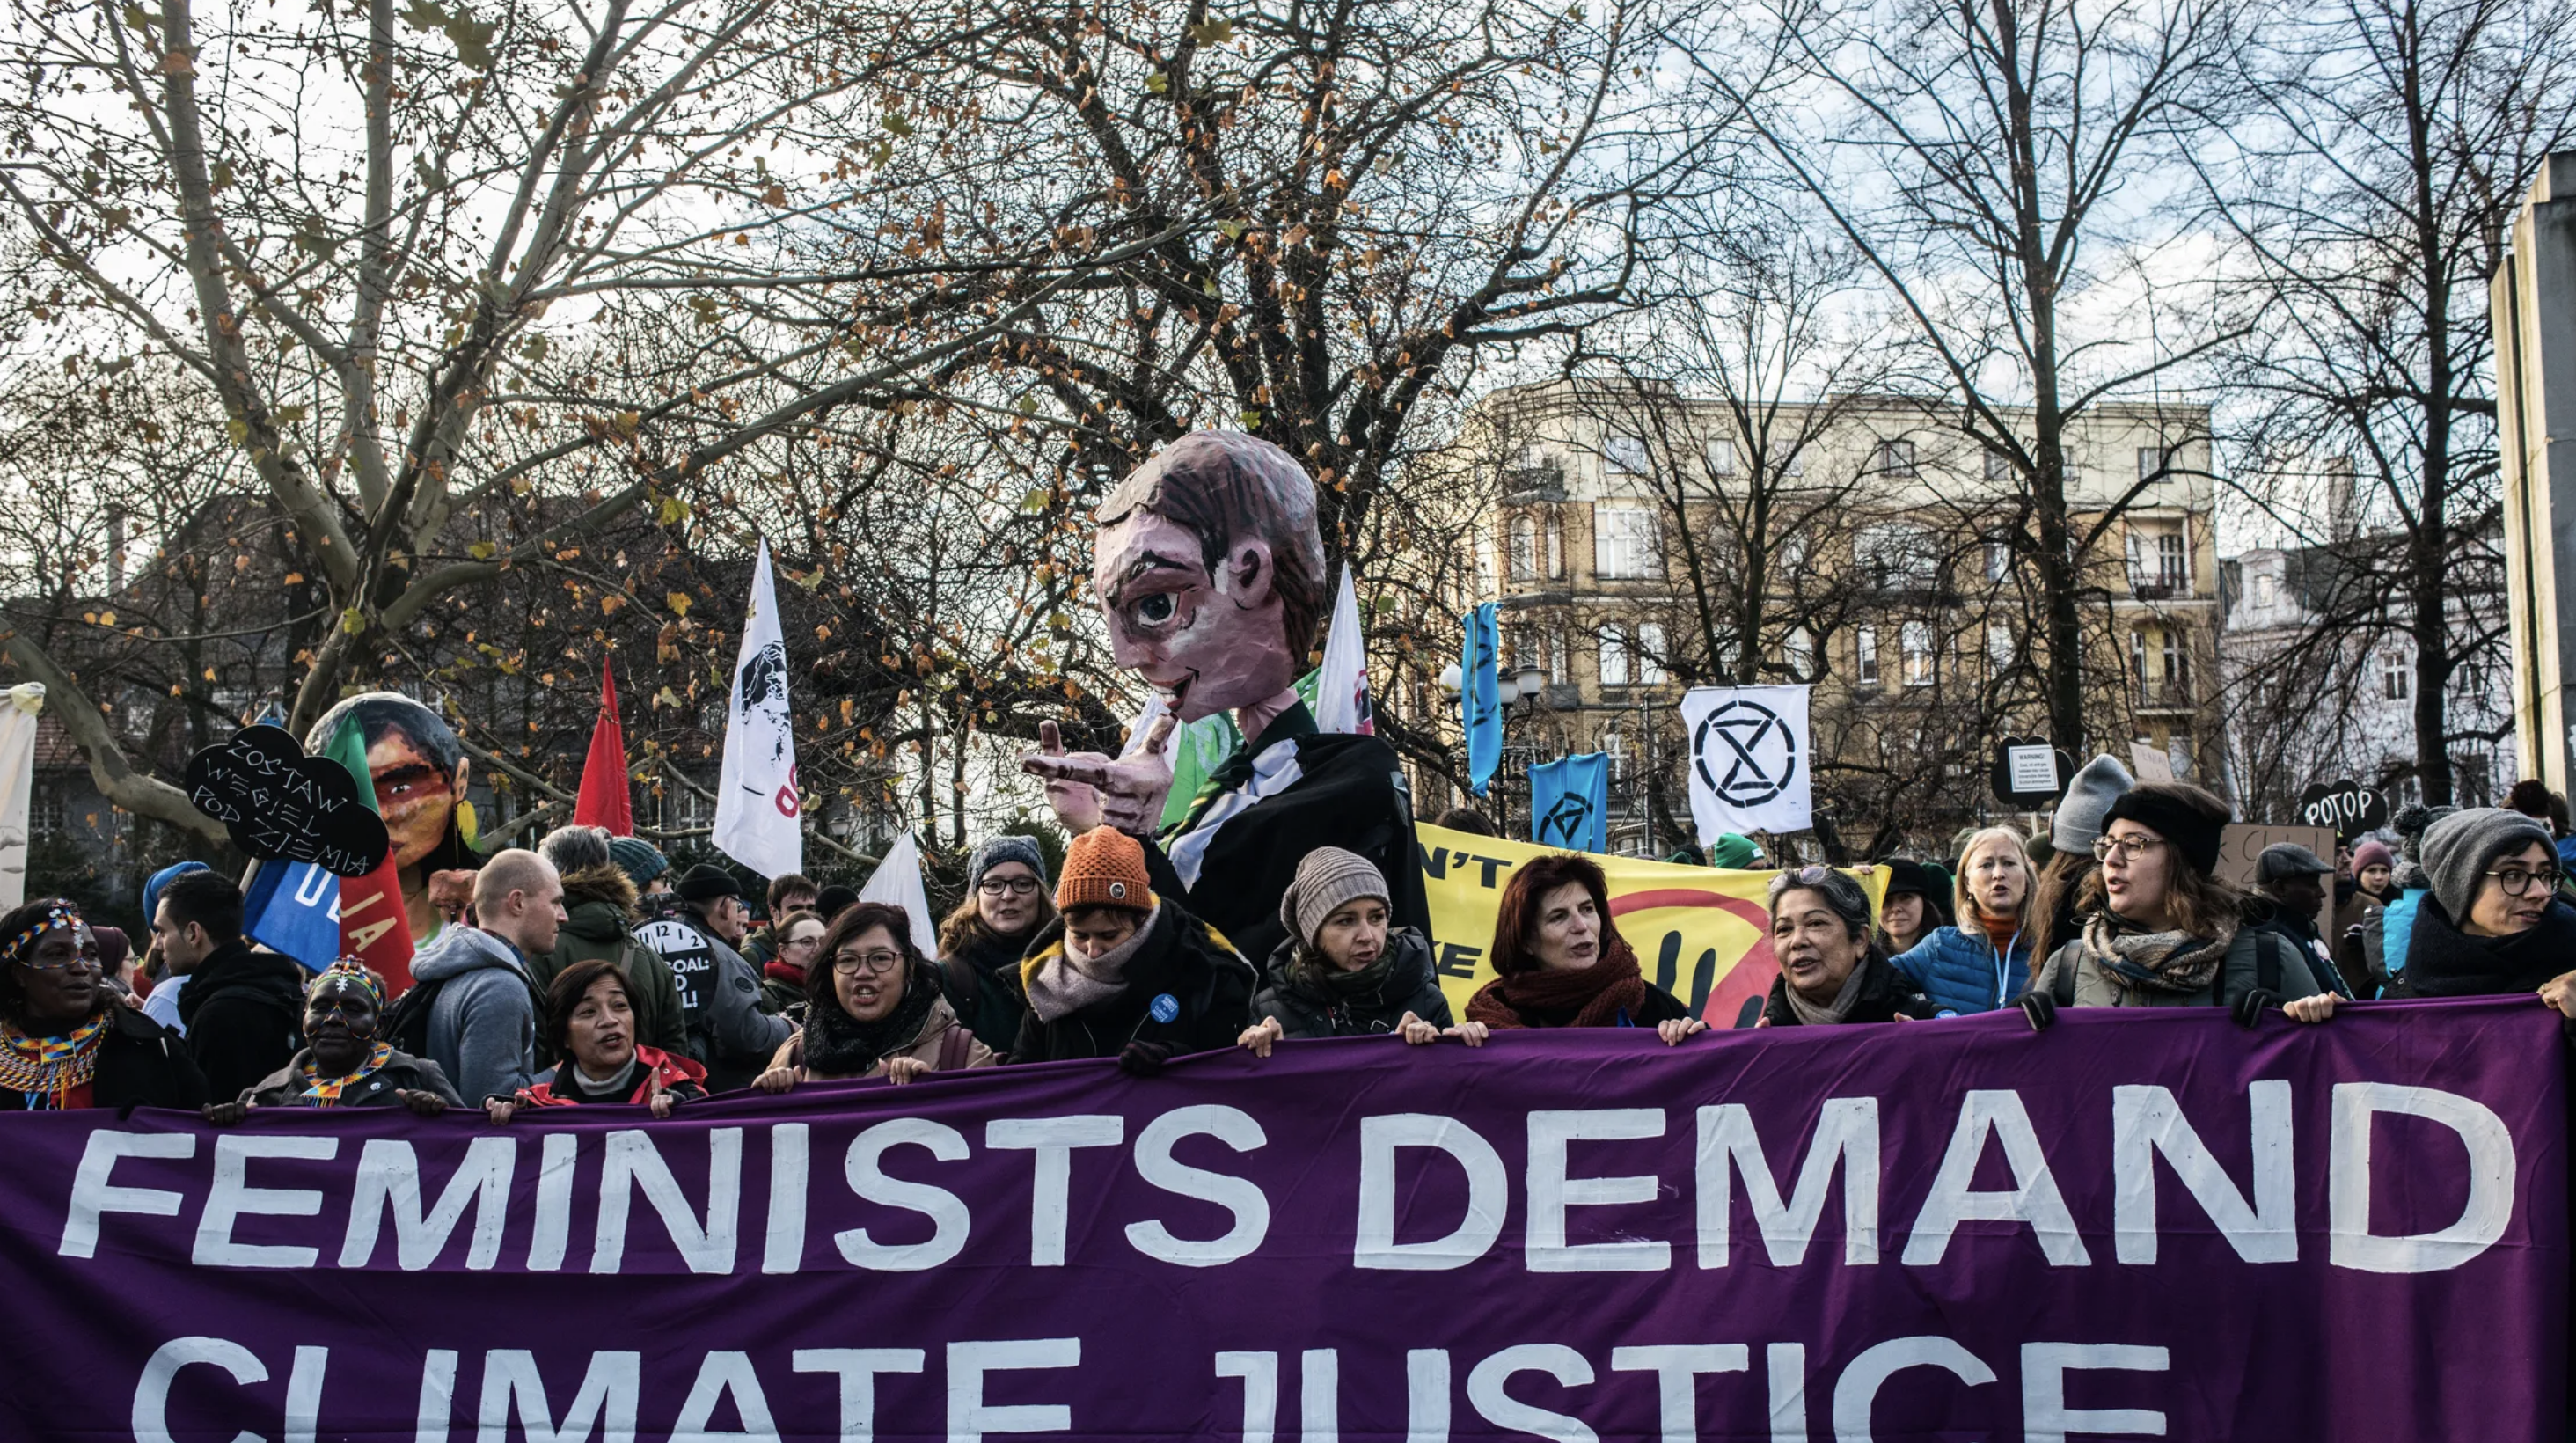 Protesters hold a sign that reads "feminists demand climate justice"